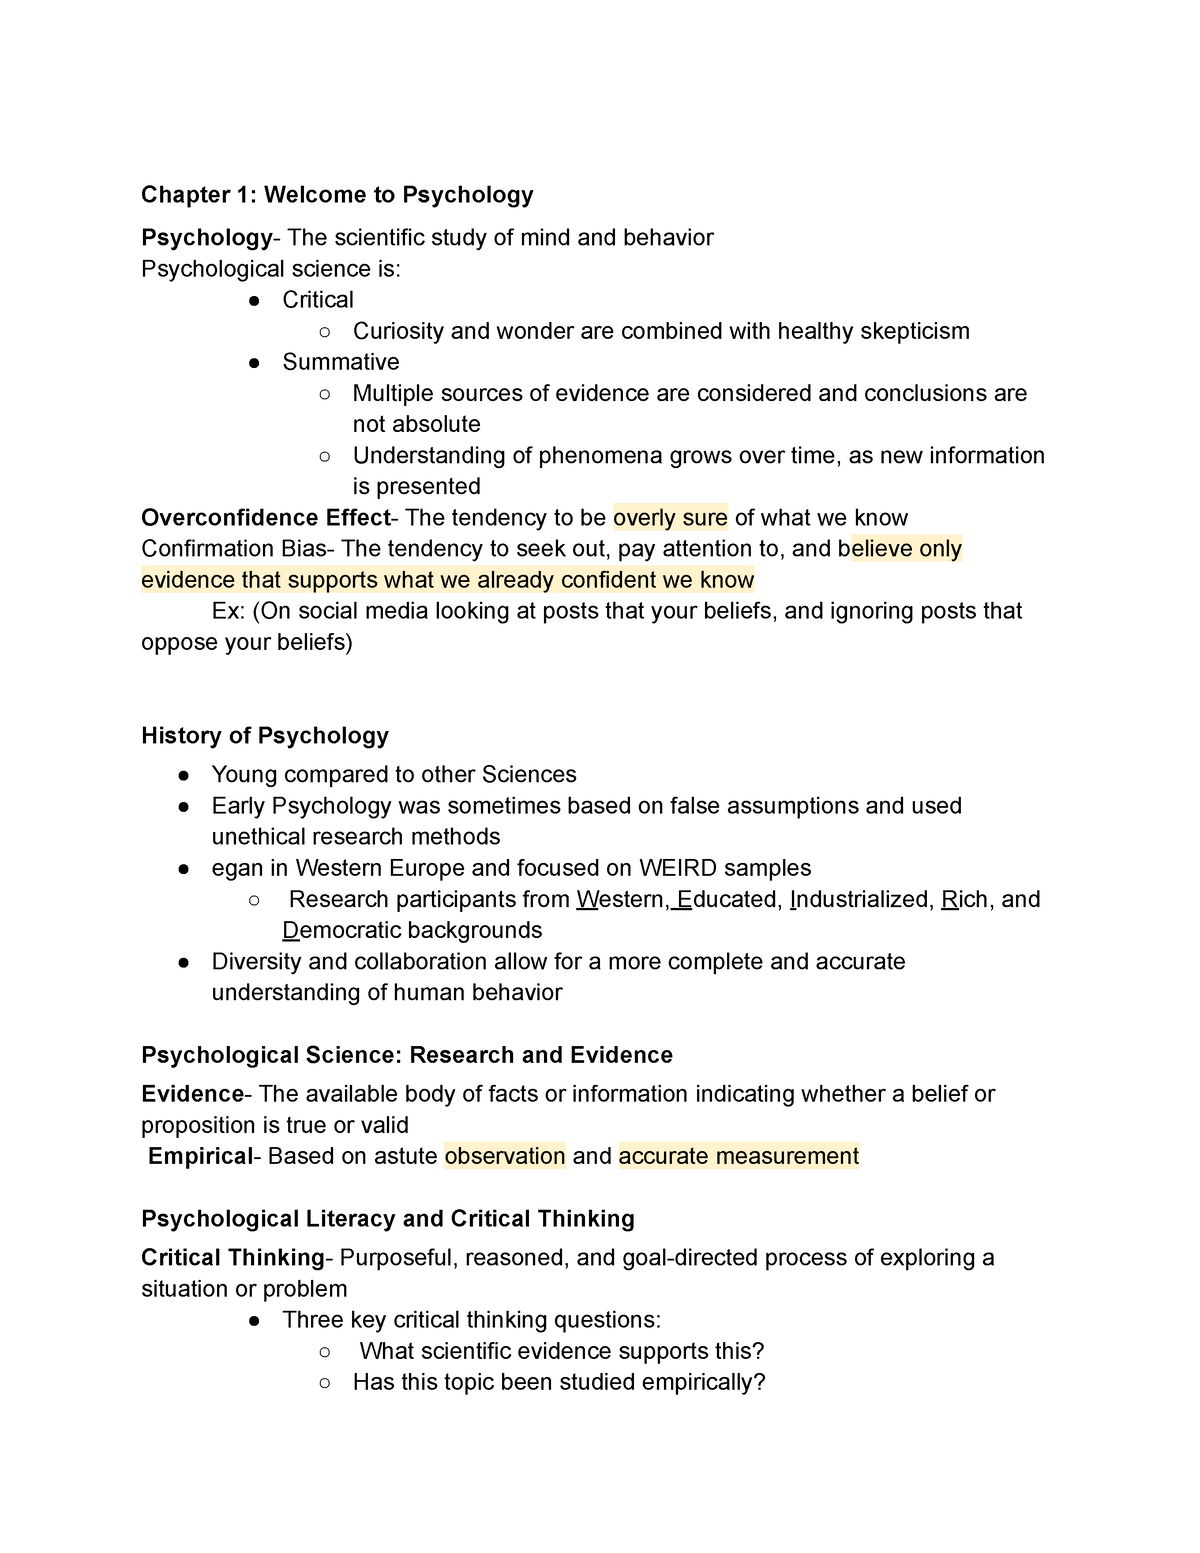 UMBC Psyc 100 Chapter 1 Notes - Chapter 1: Welcome to Psychology ...